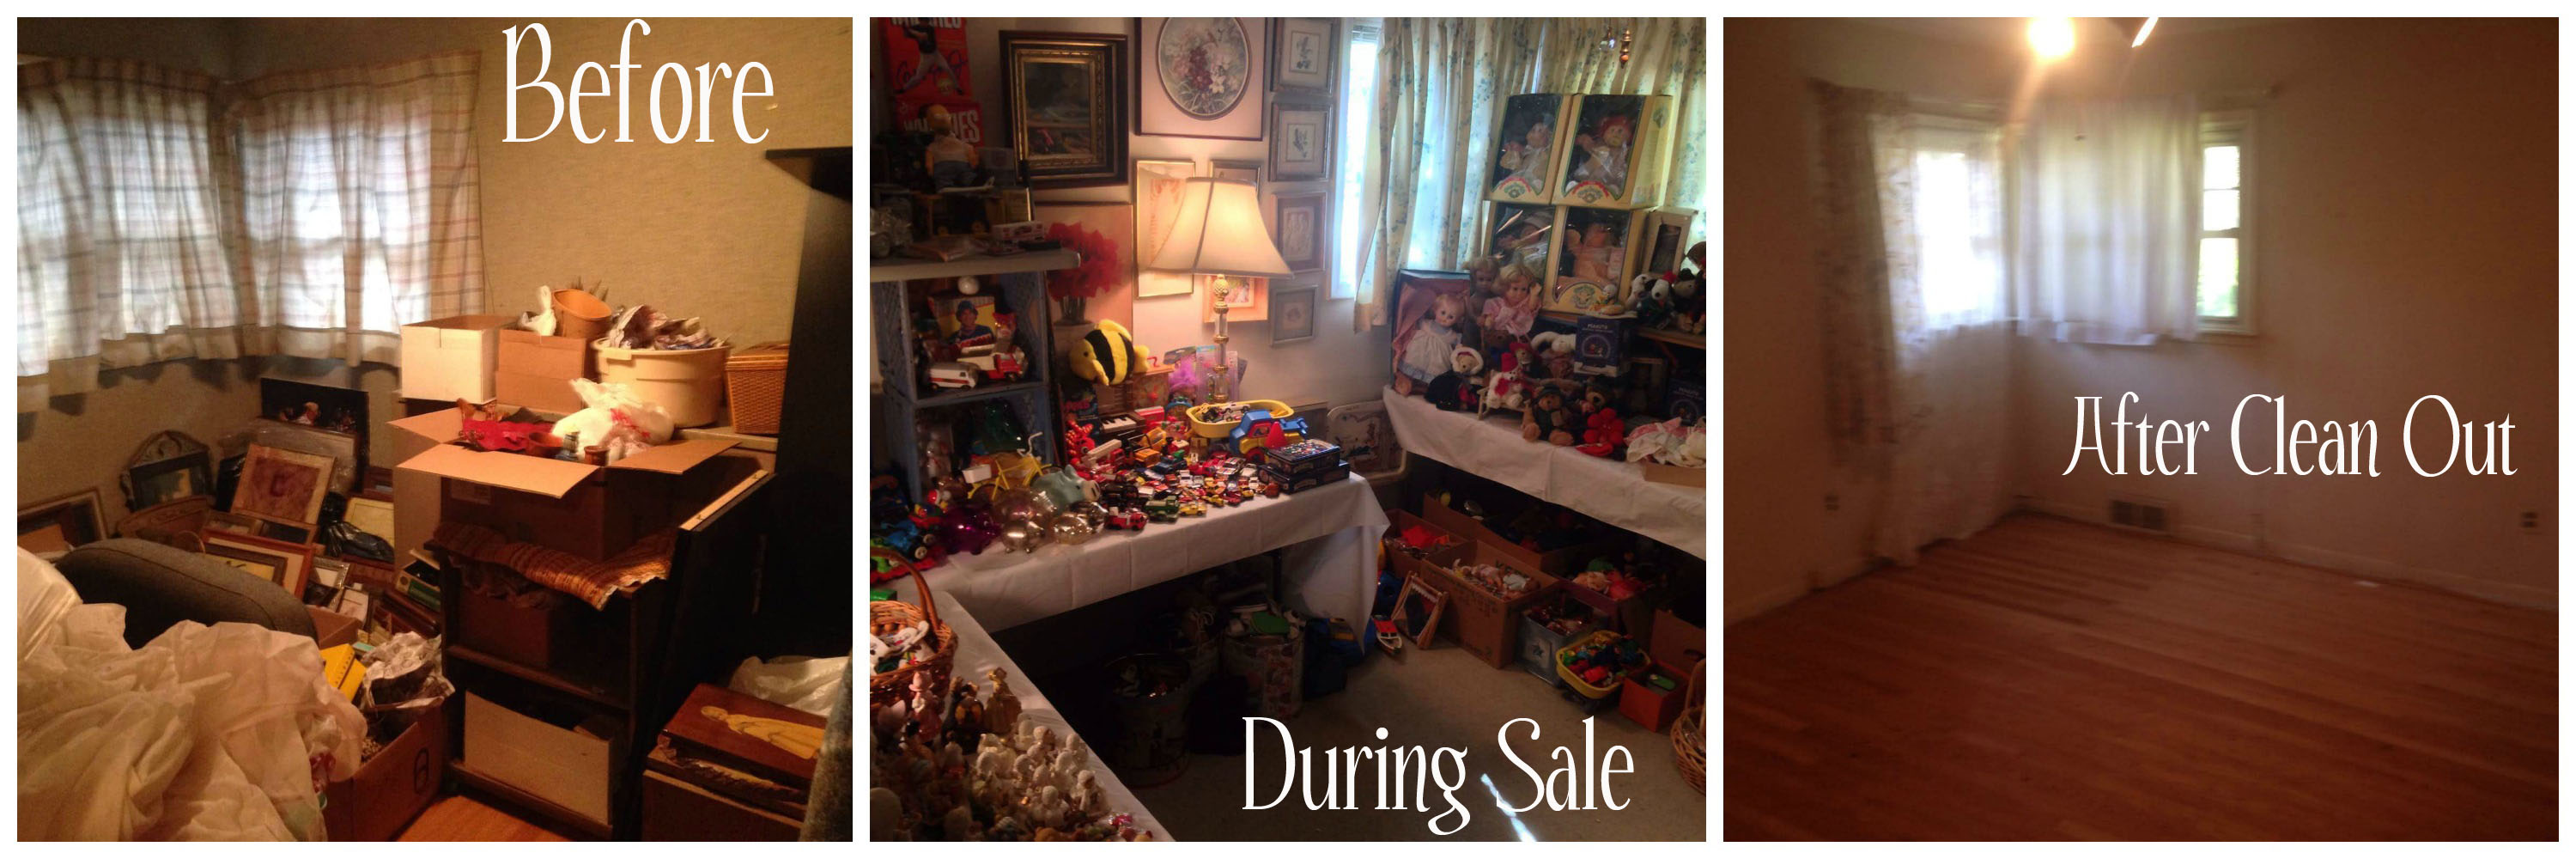 A glimpse into how Thomas's Treasures arranges and cleans up their estate sales.